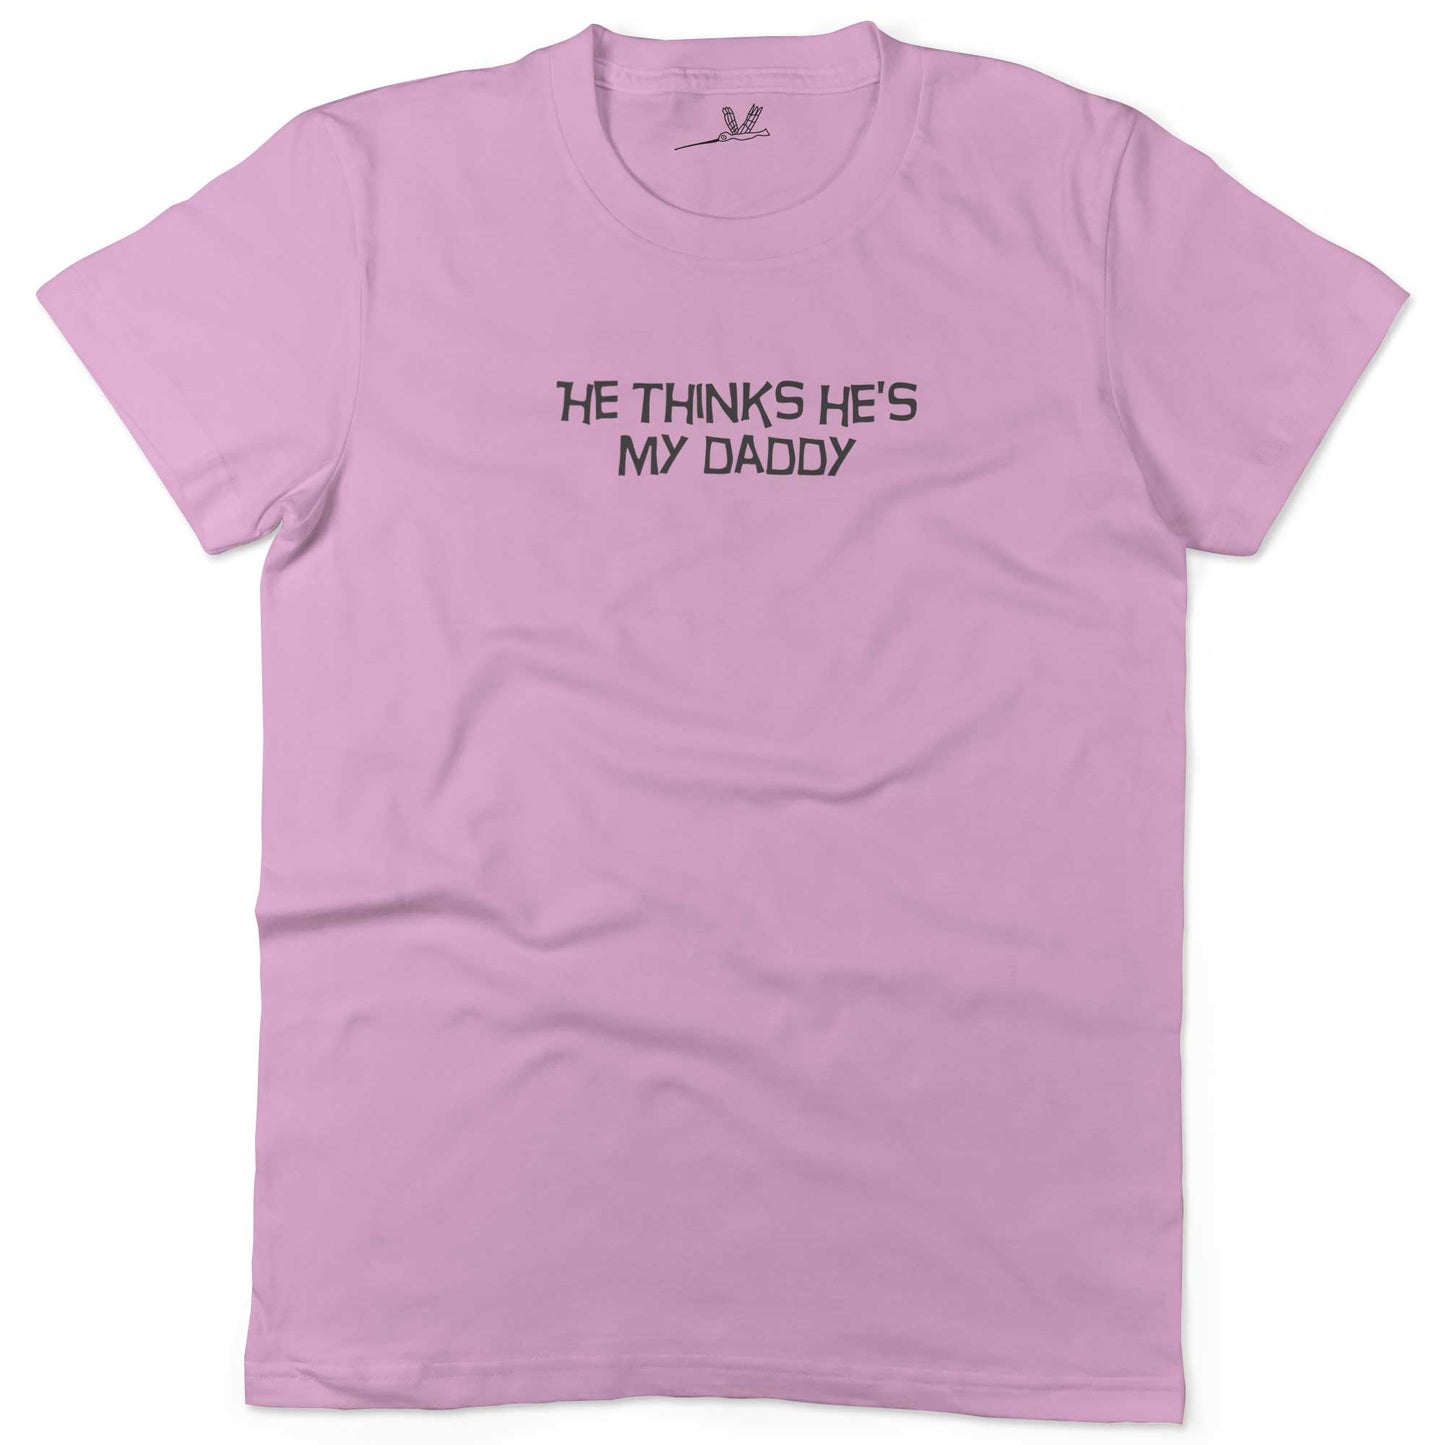 He Thinks He's My Daddy Unisex Or Women's Cotton T-shirt-Pink-Woman